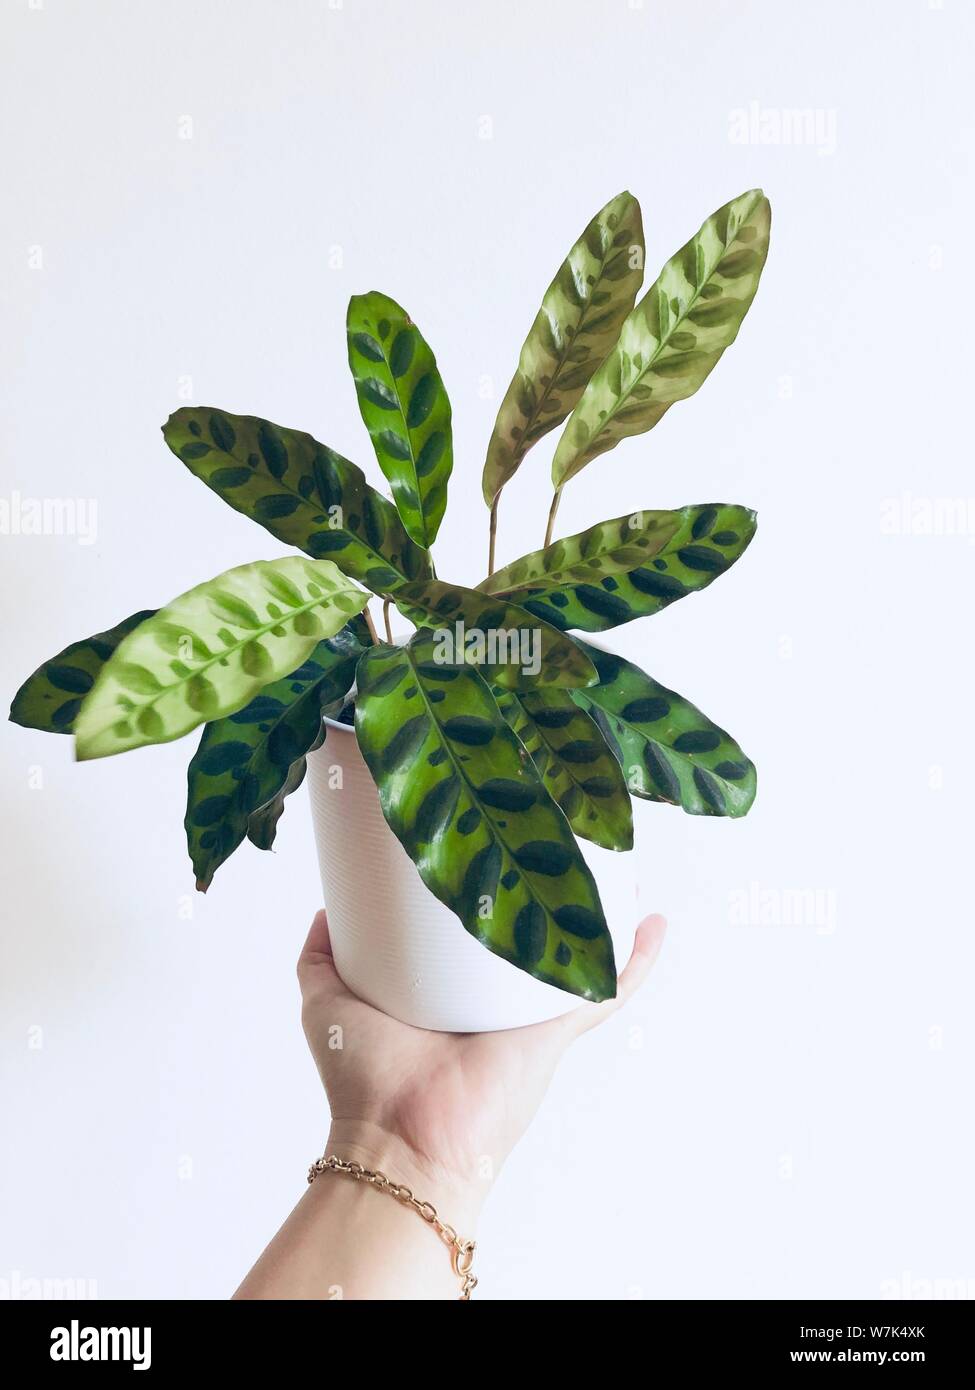 Calathea Lancifolia house plant green long leaves with strips pattern on white background holding plant Stock Photo